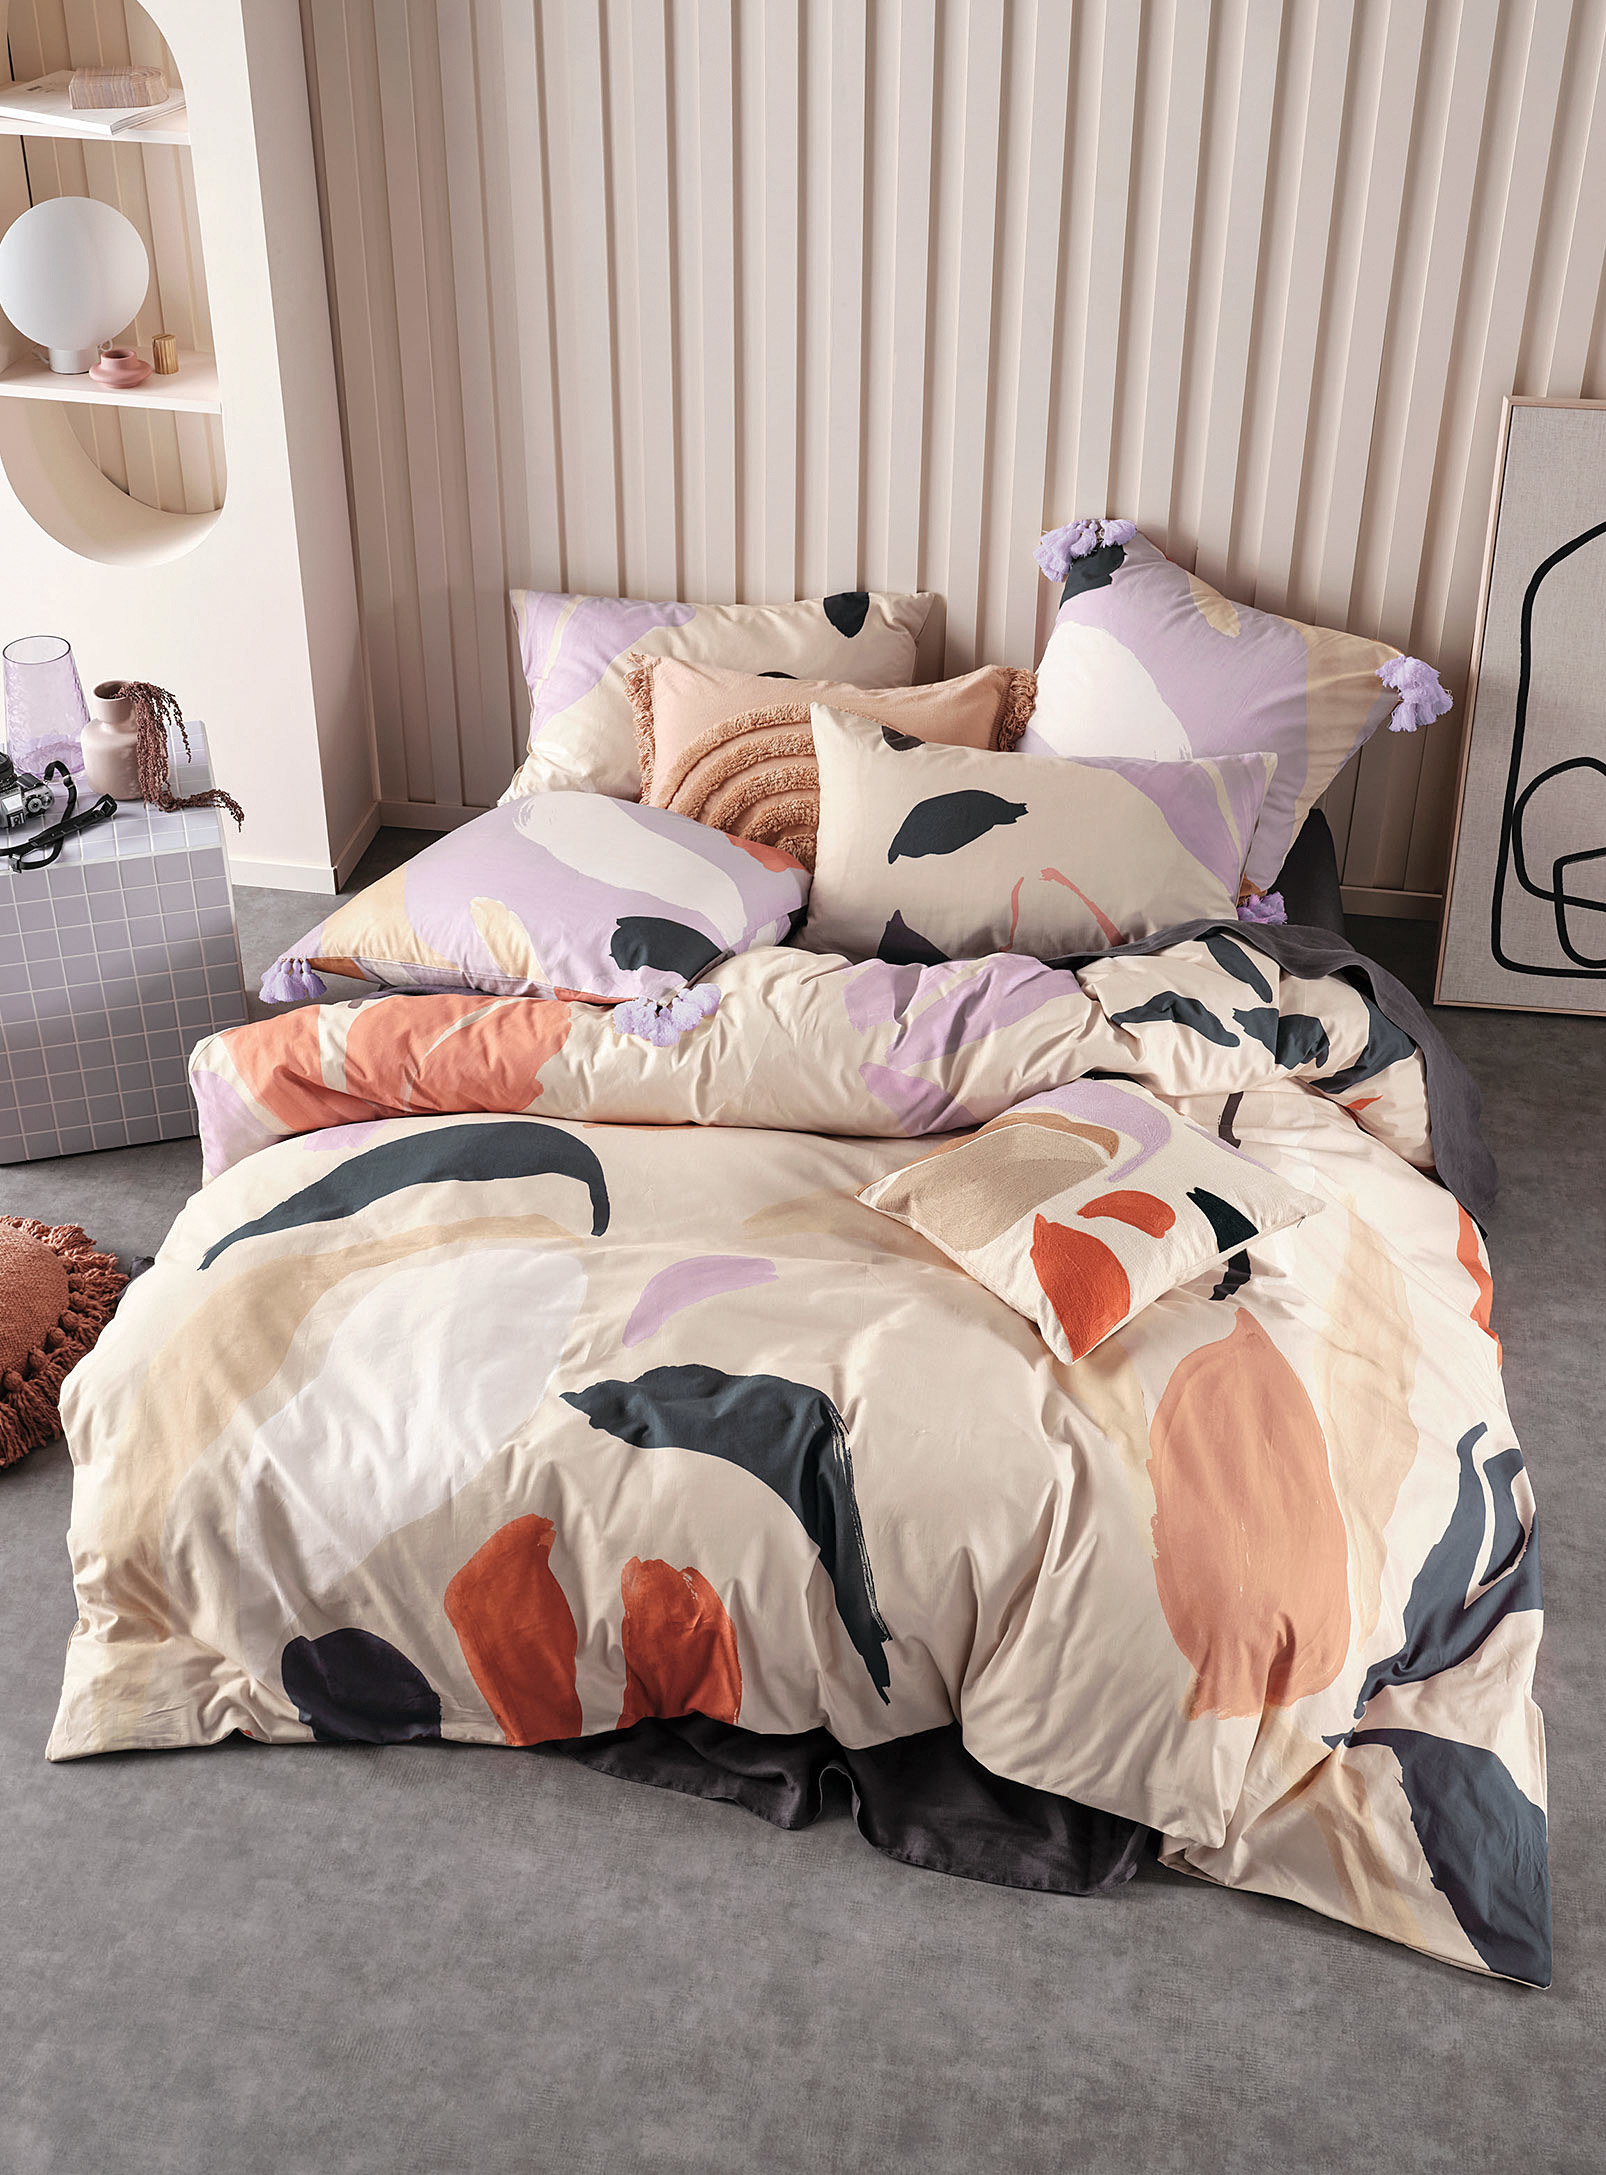 A duvet with matching pillows on a bed